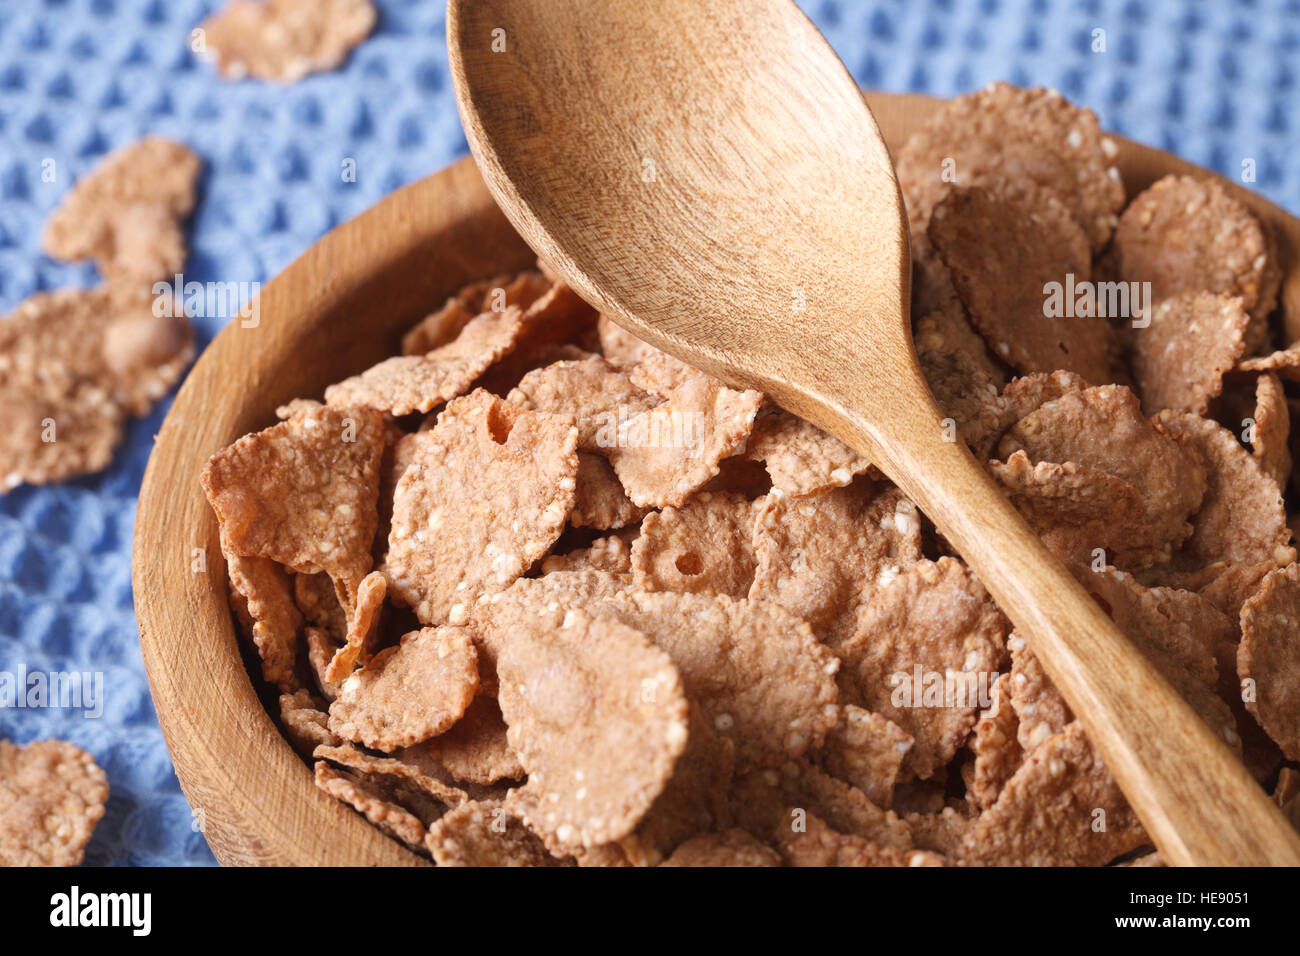 Dietary breakfast: bran flakes in a wooden bowl closeup. horizontal, rustic style Stock Photo